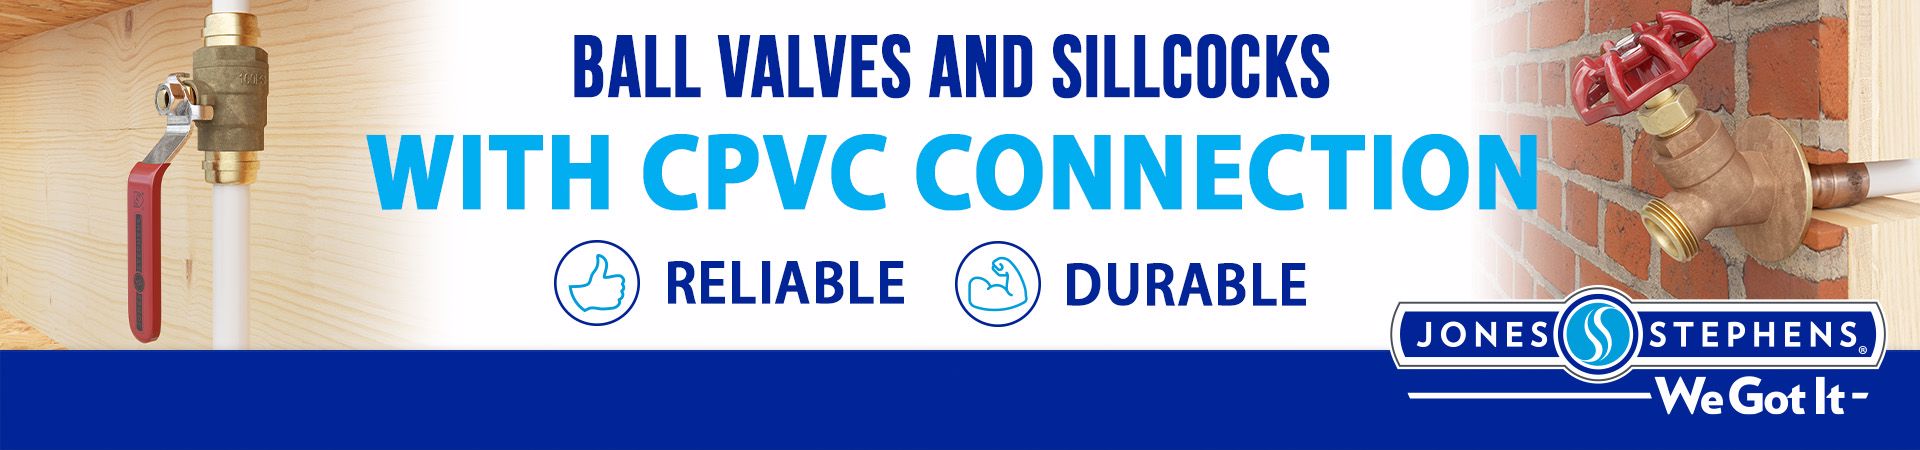 Valves with CPVC Connections